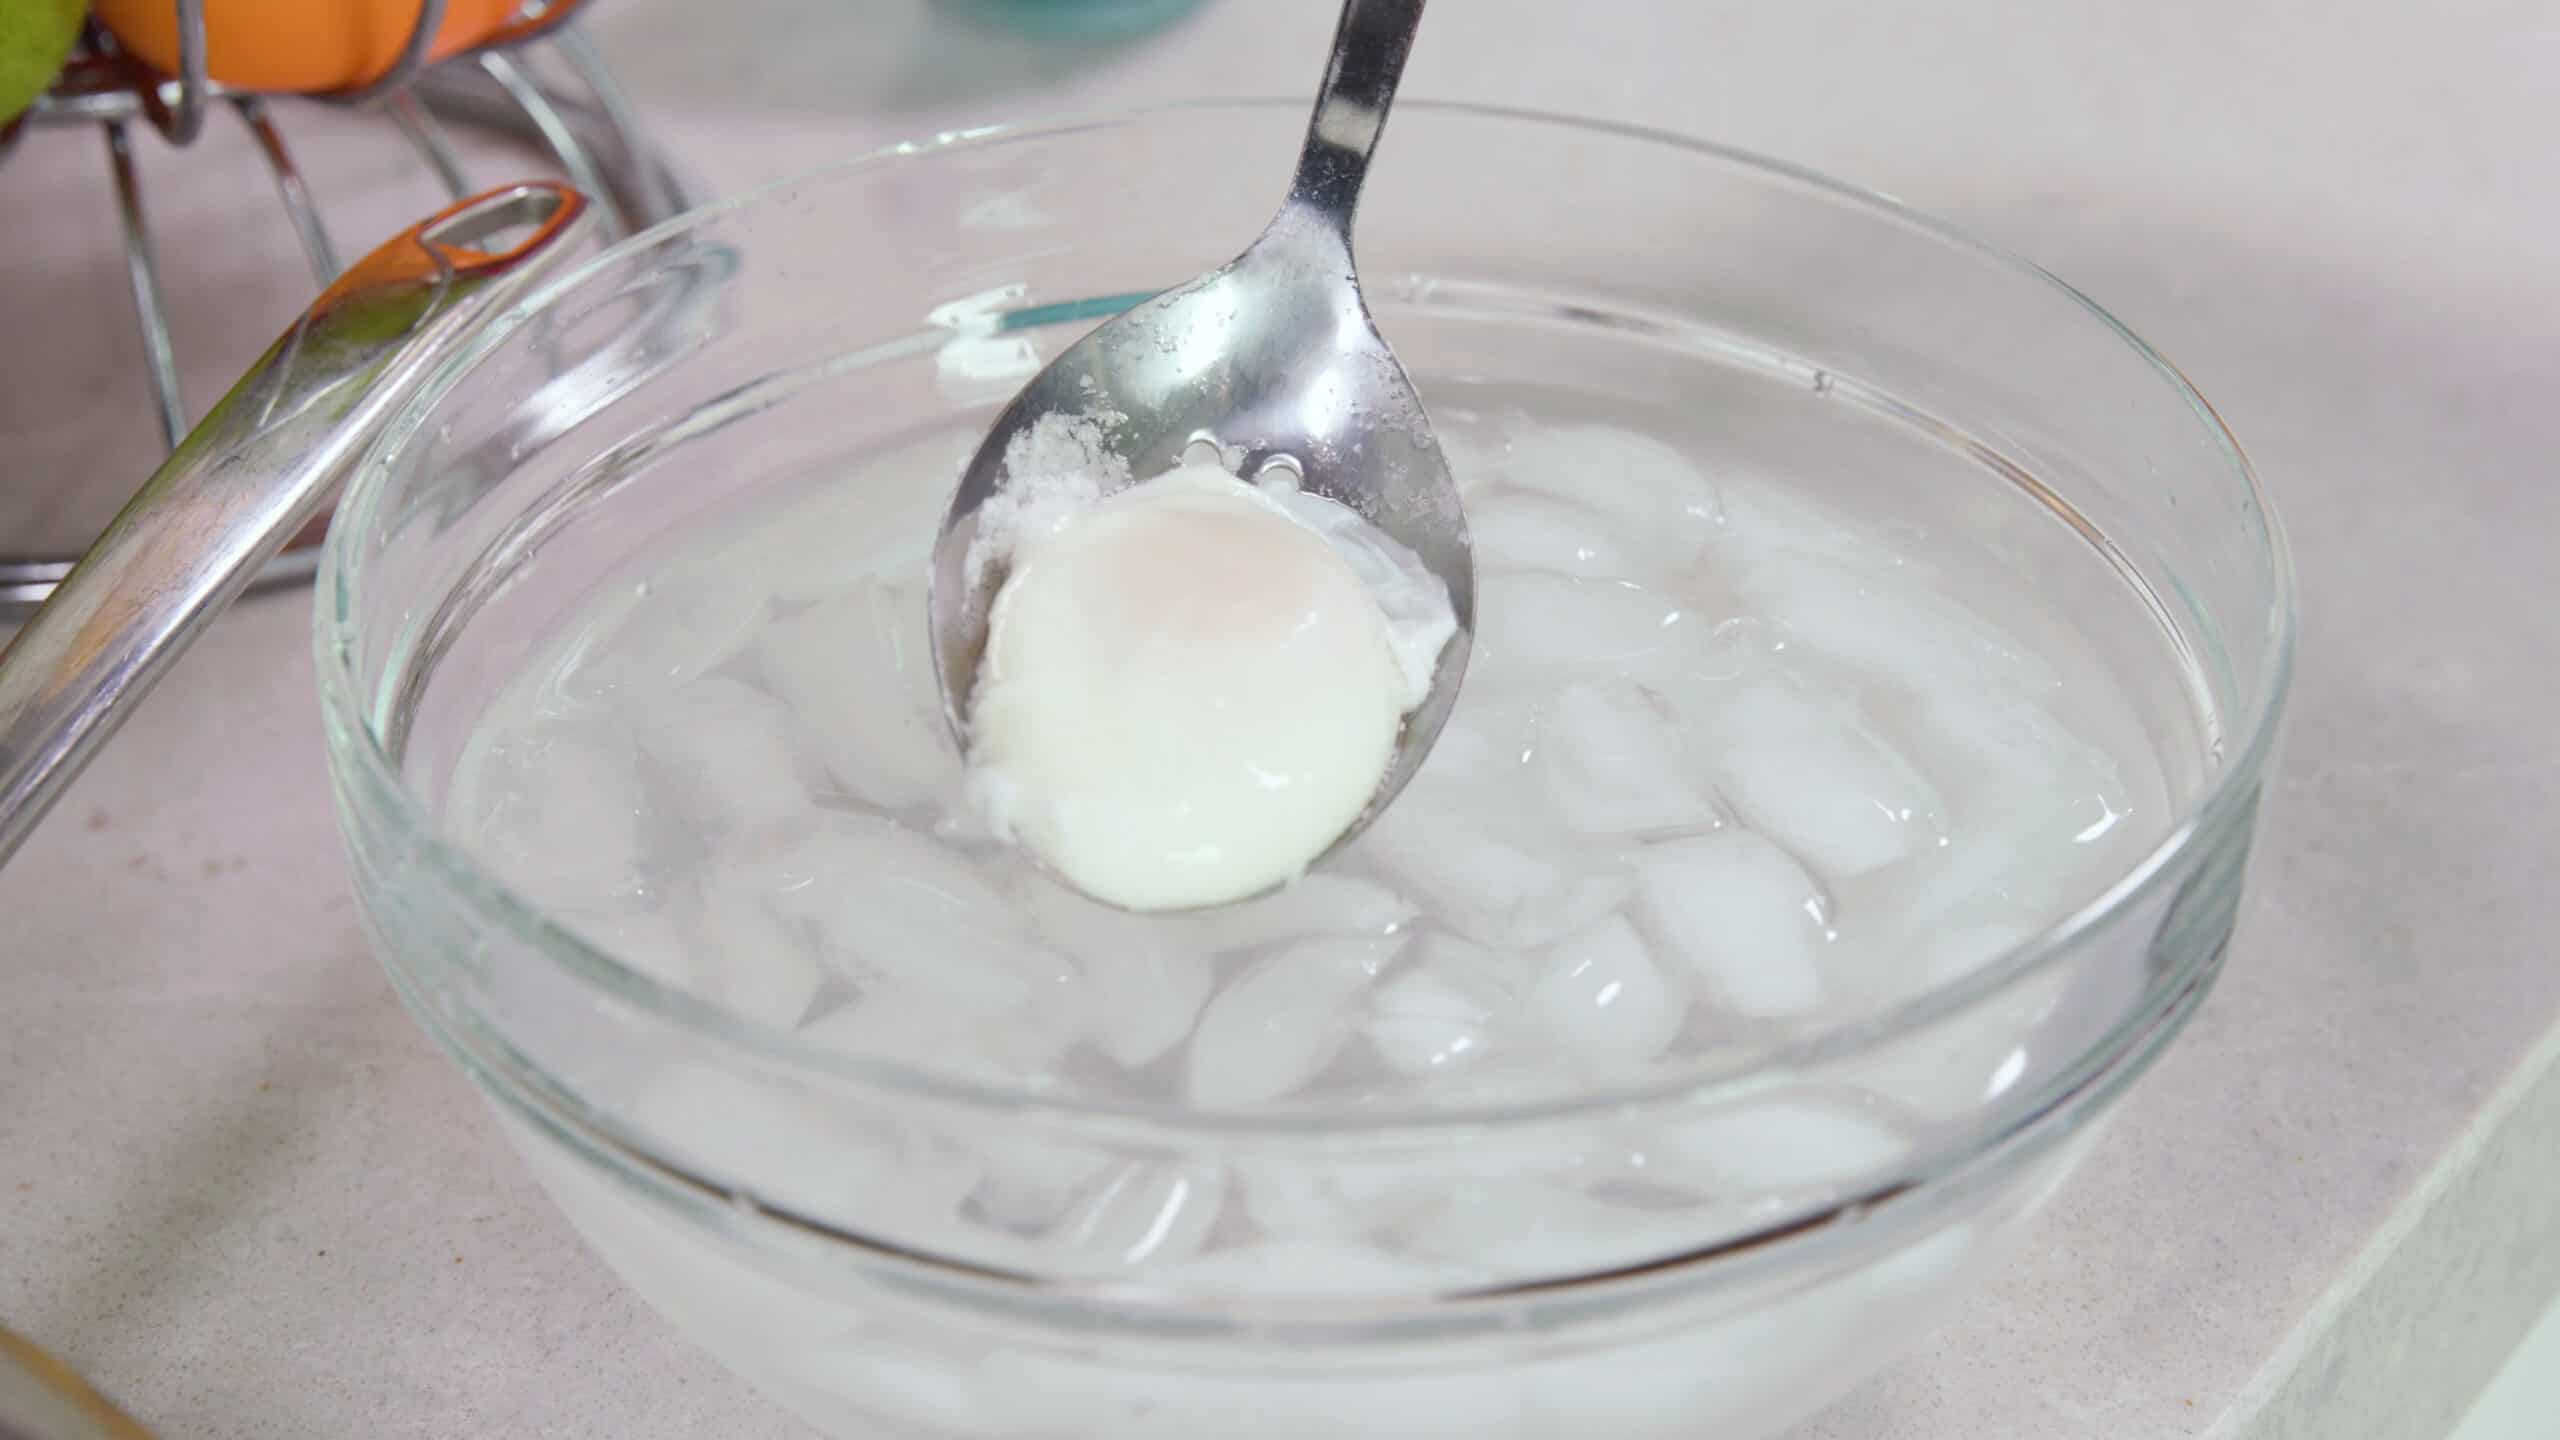 Angled view of slotted metal spoon with a single poached egg being placed into an ice bath in a clear mixing bowl on a countertop to cool